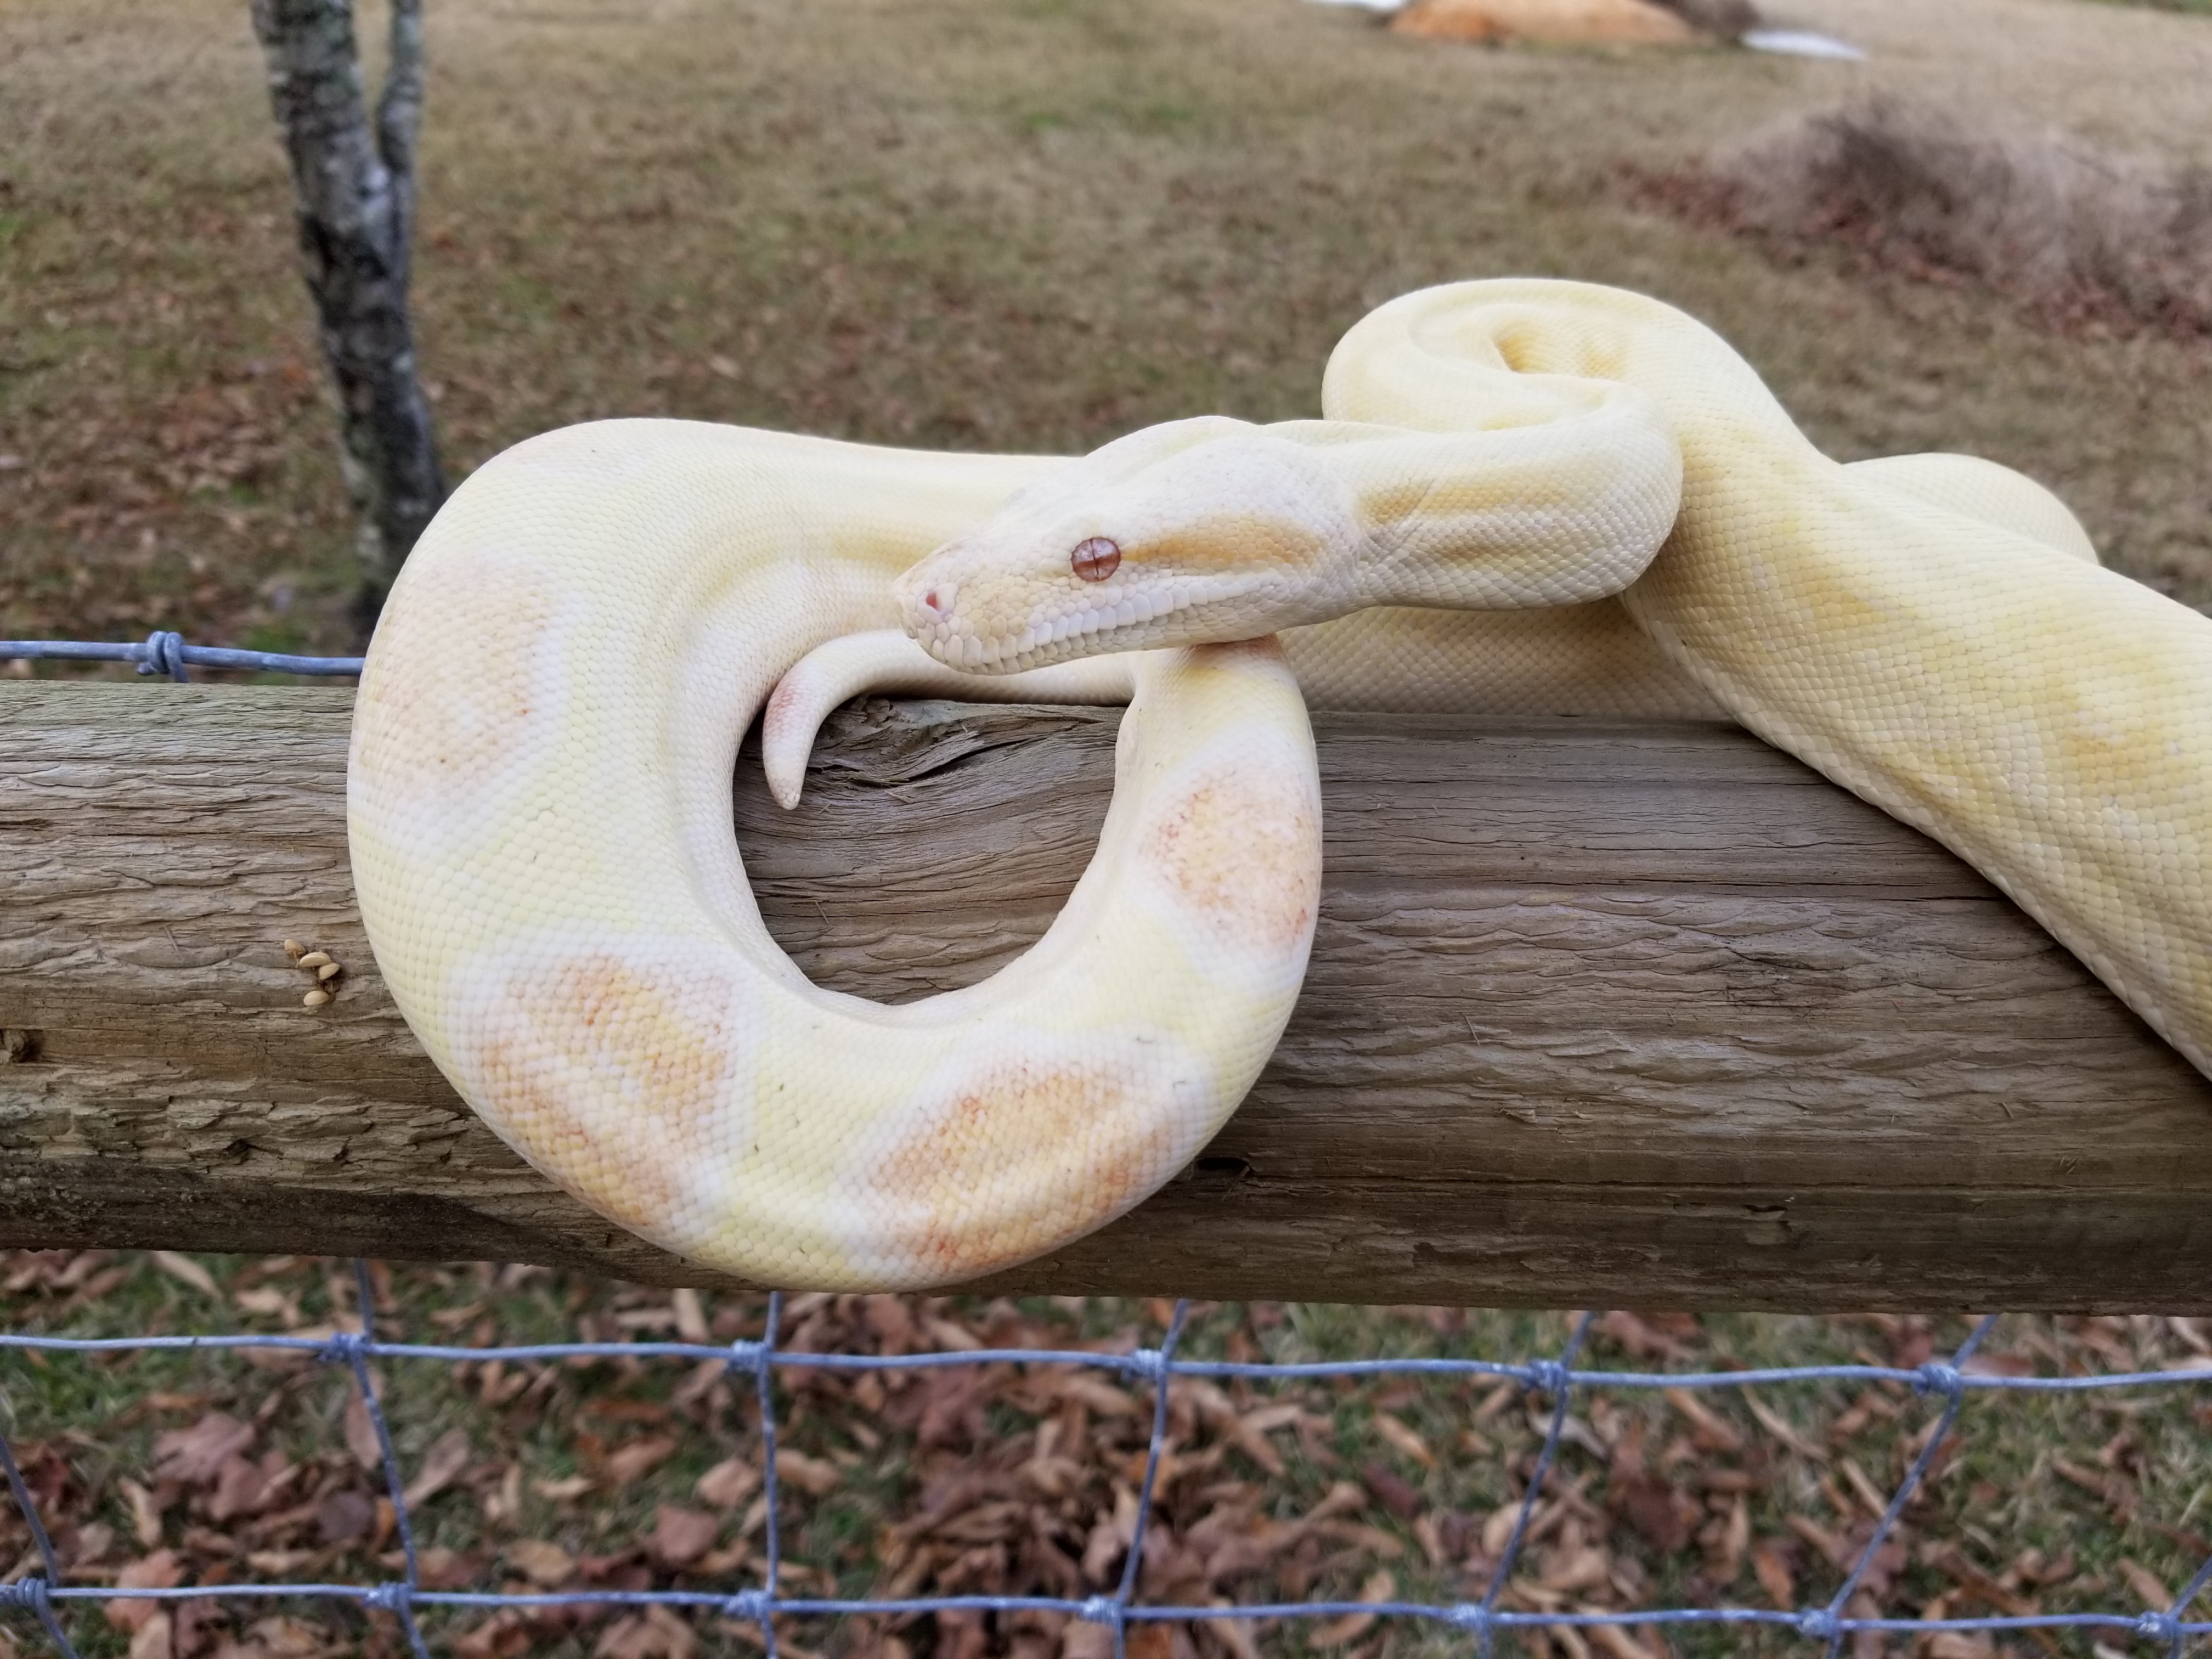 Kahl Albino Boa Constrictor by A&J Exotics